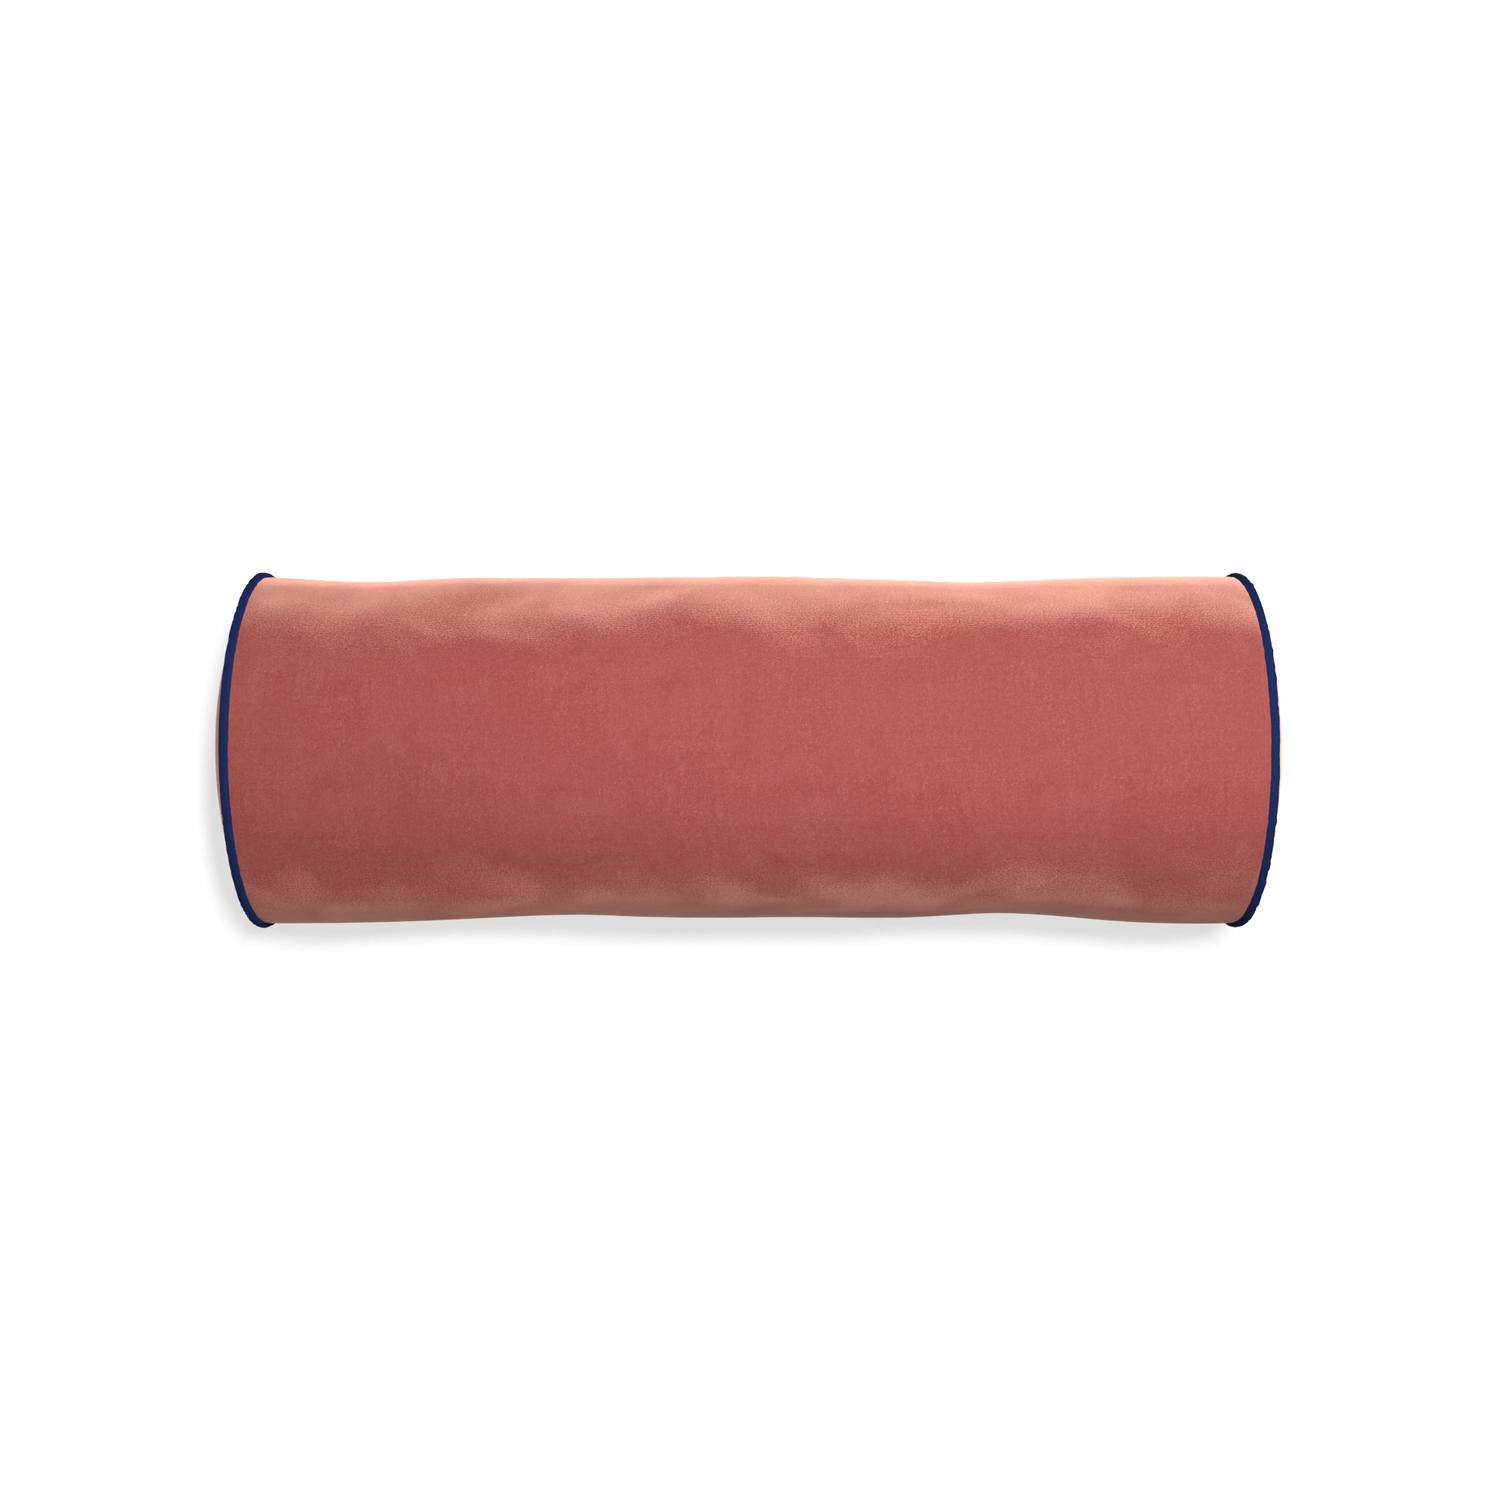 bolster coral velvet pillow with navy blue piping 